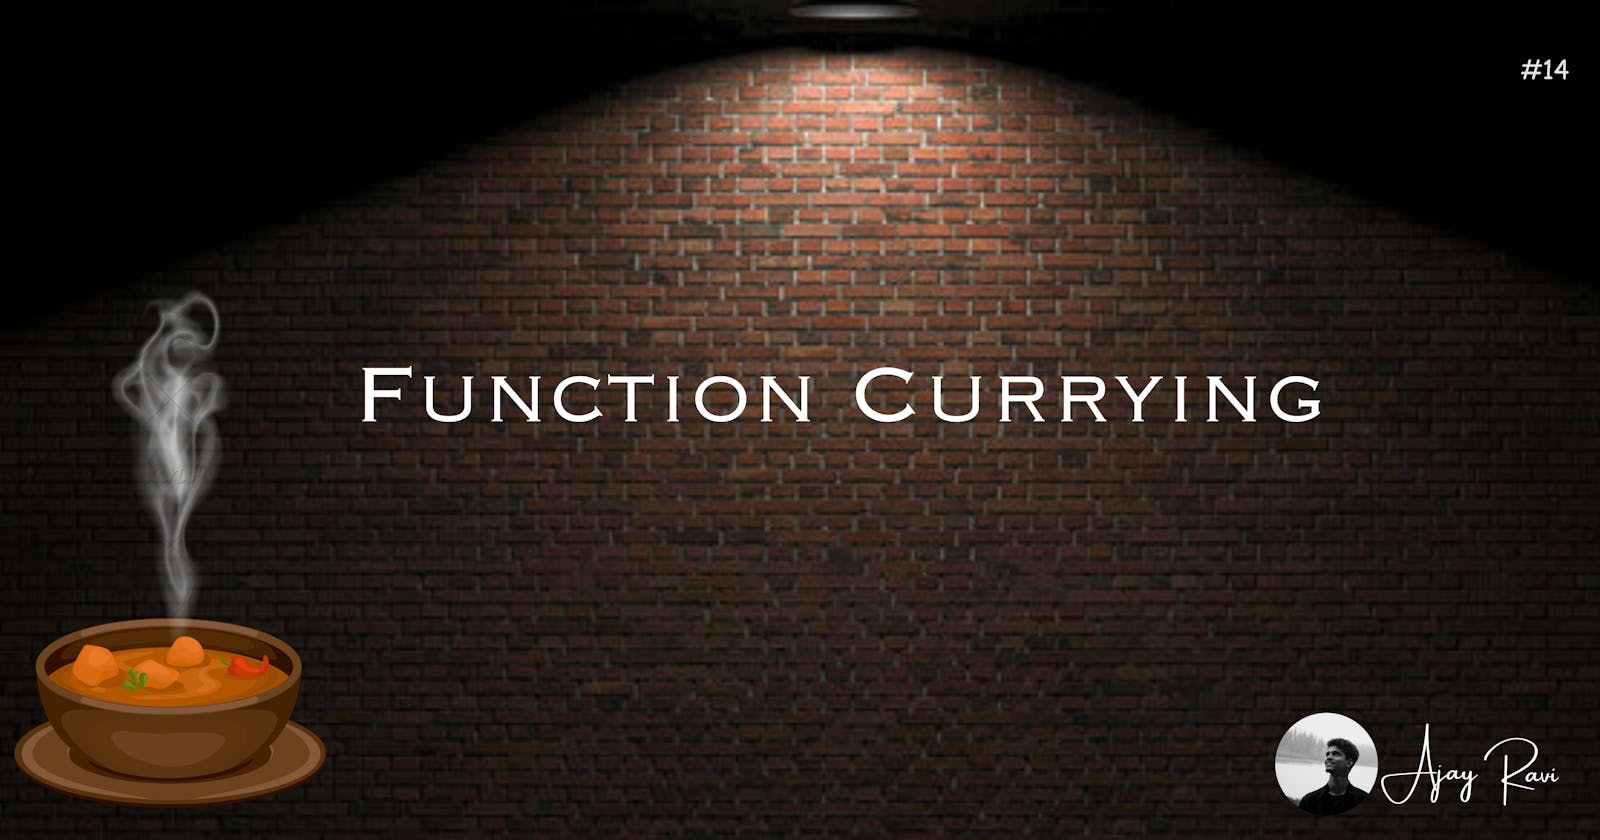 Function Currying!